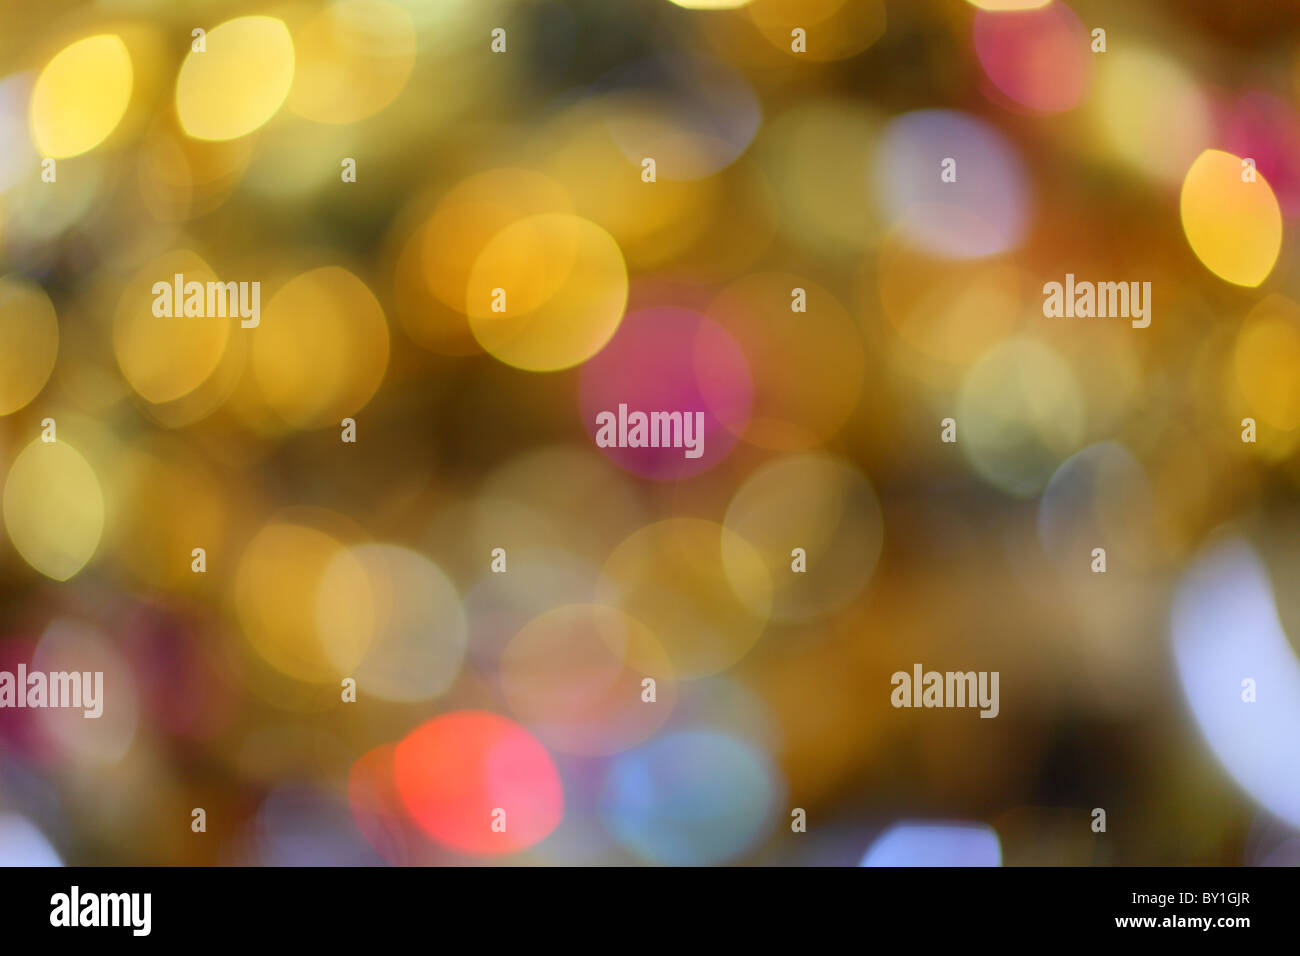 Abstract colorful defocus background Stock Photo